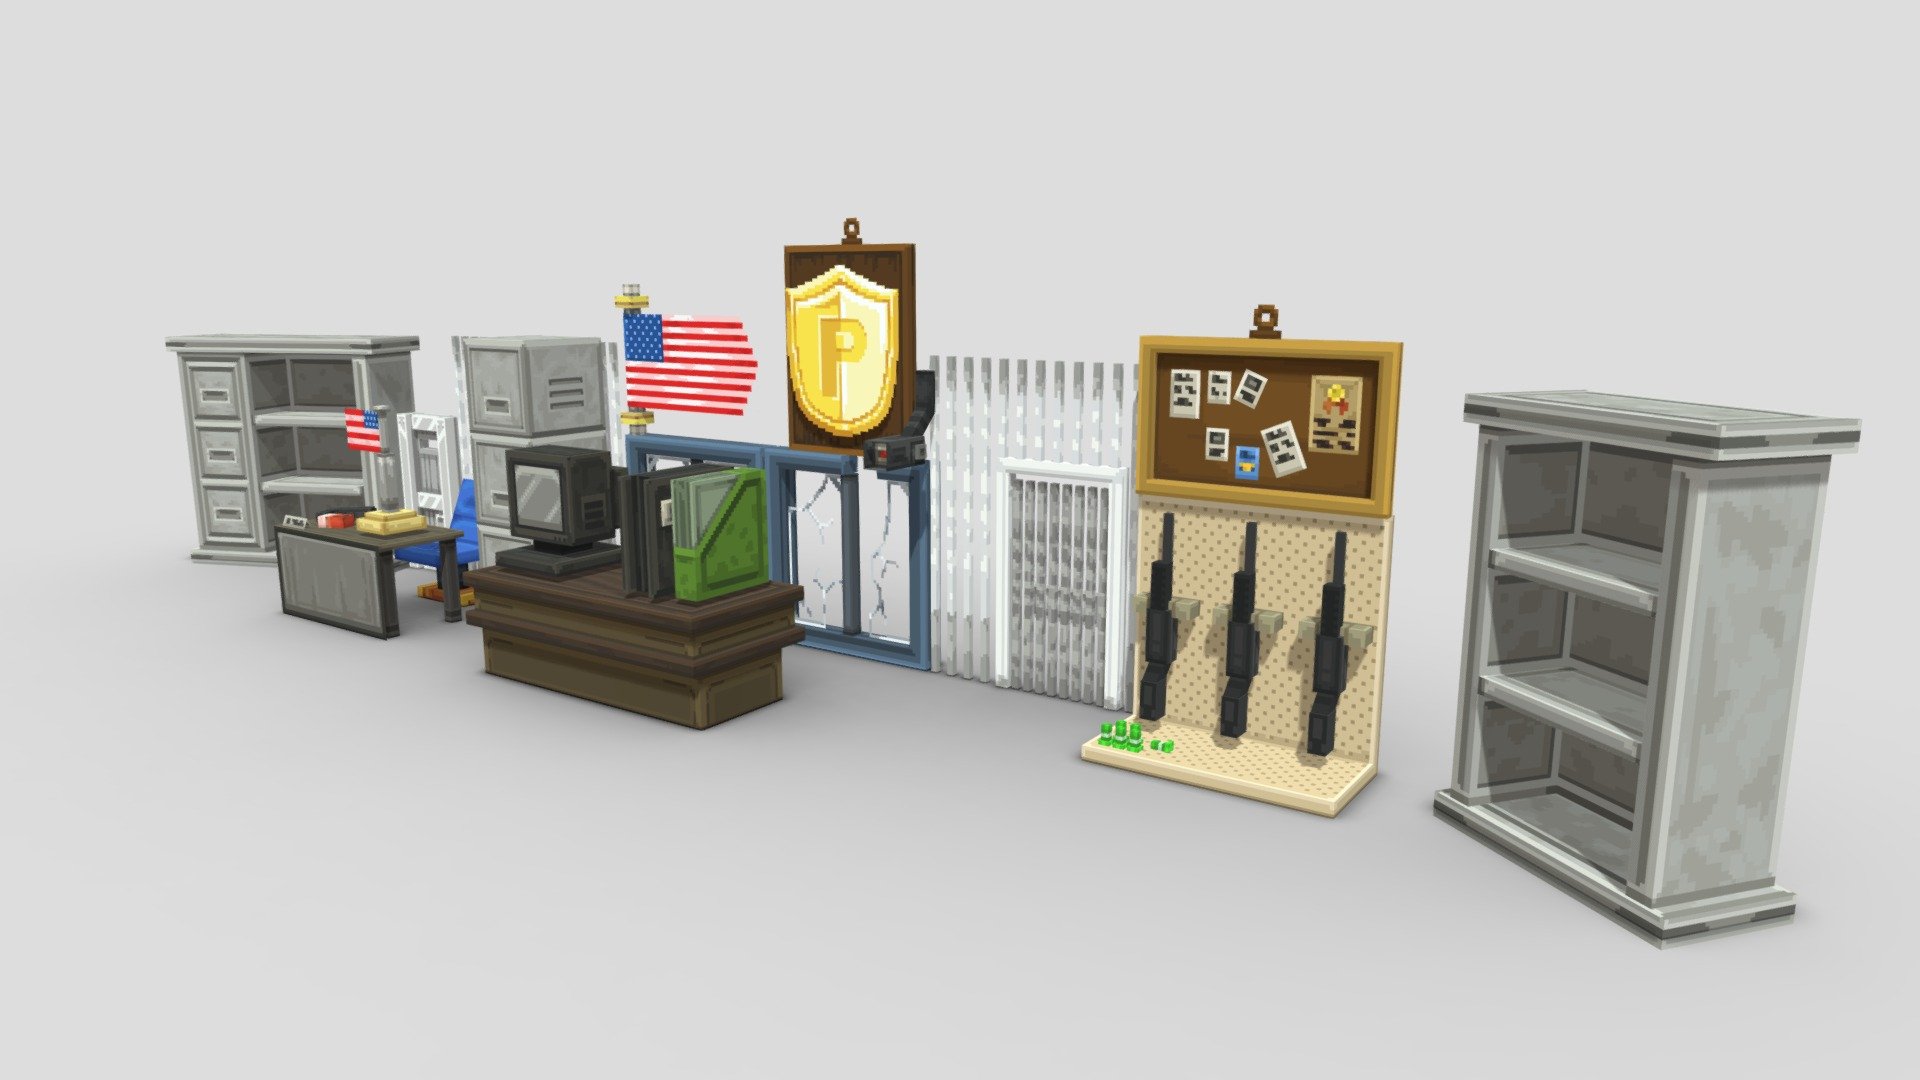 Police Furniture Pack, Includes 20 models:




Announce Table

Big Flag

Board

Cage Door

Cage

CCTV

Chair

Document

Gun Shelf

Gun

Iron Door

Iron Locker

Iron Shelf x2

Sign

Small Flag

Table Small

TV

Windows (Unbroken)

Windows (Broken)
 - Police Furniture Pack - Buy Royalty Free 3D model by EliteCreatures 3d model